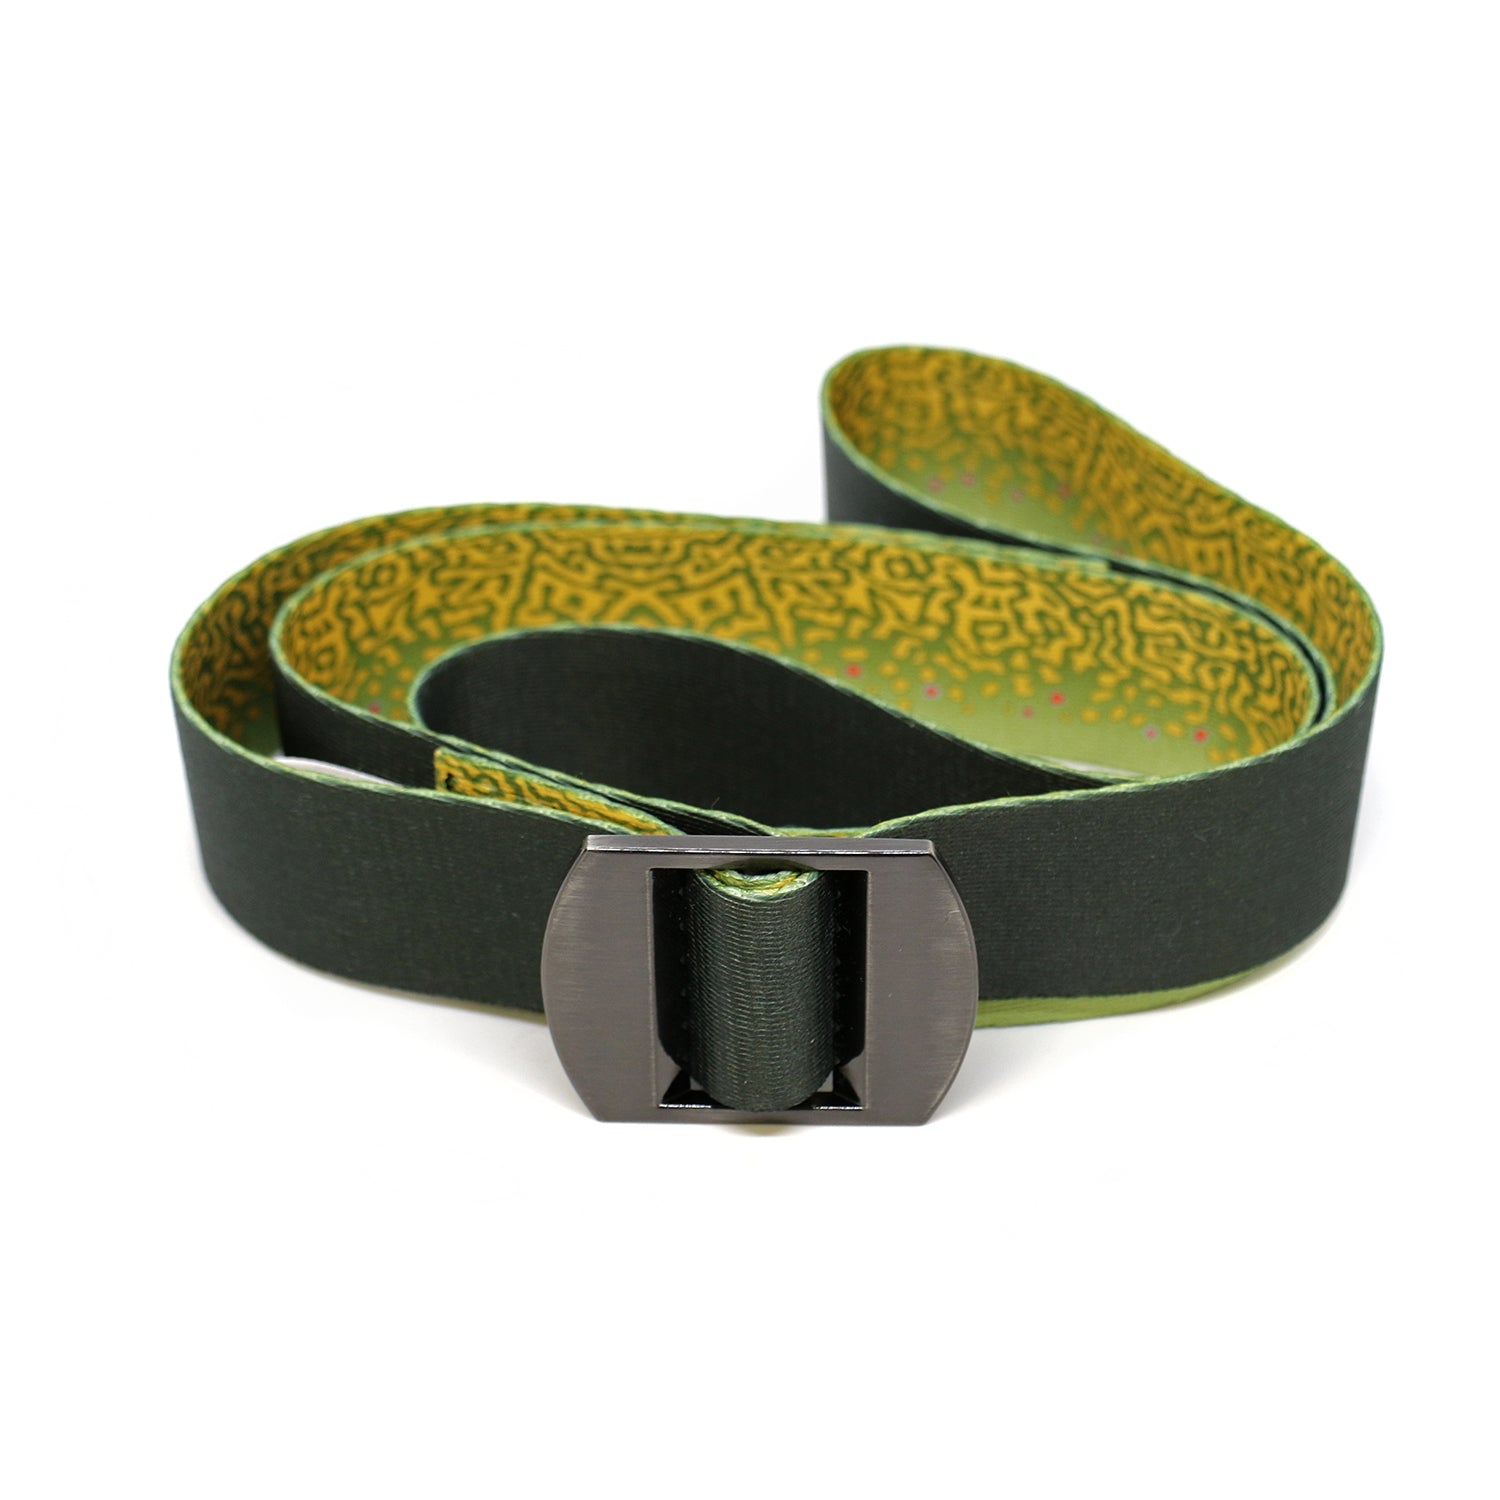 A nylon belt with a metal front buckle has brook trout print, reversed to show black backside